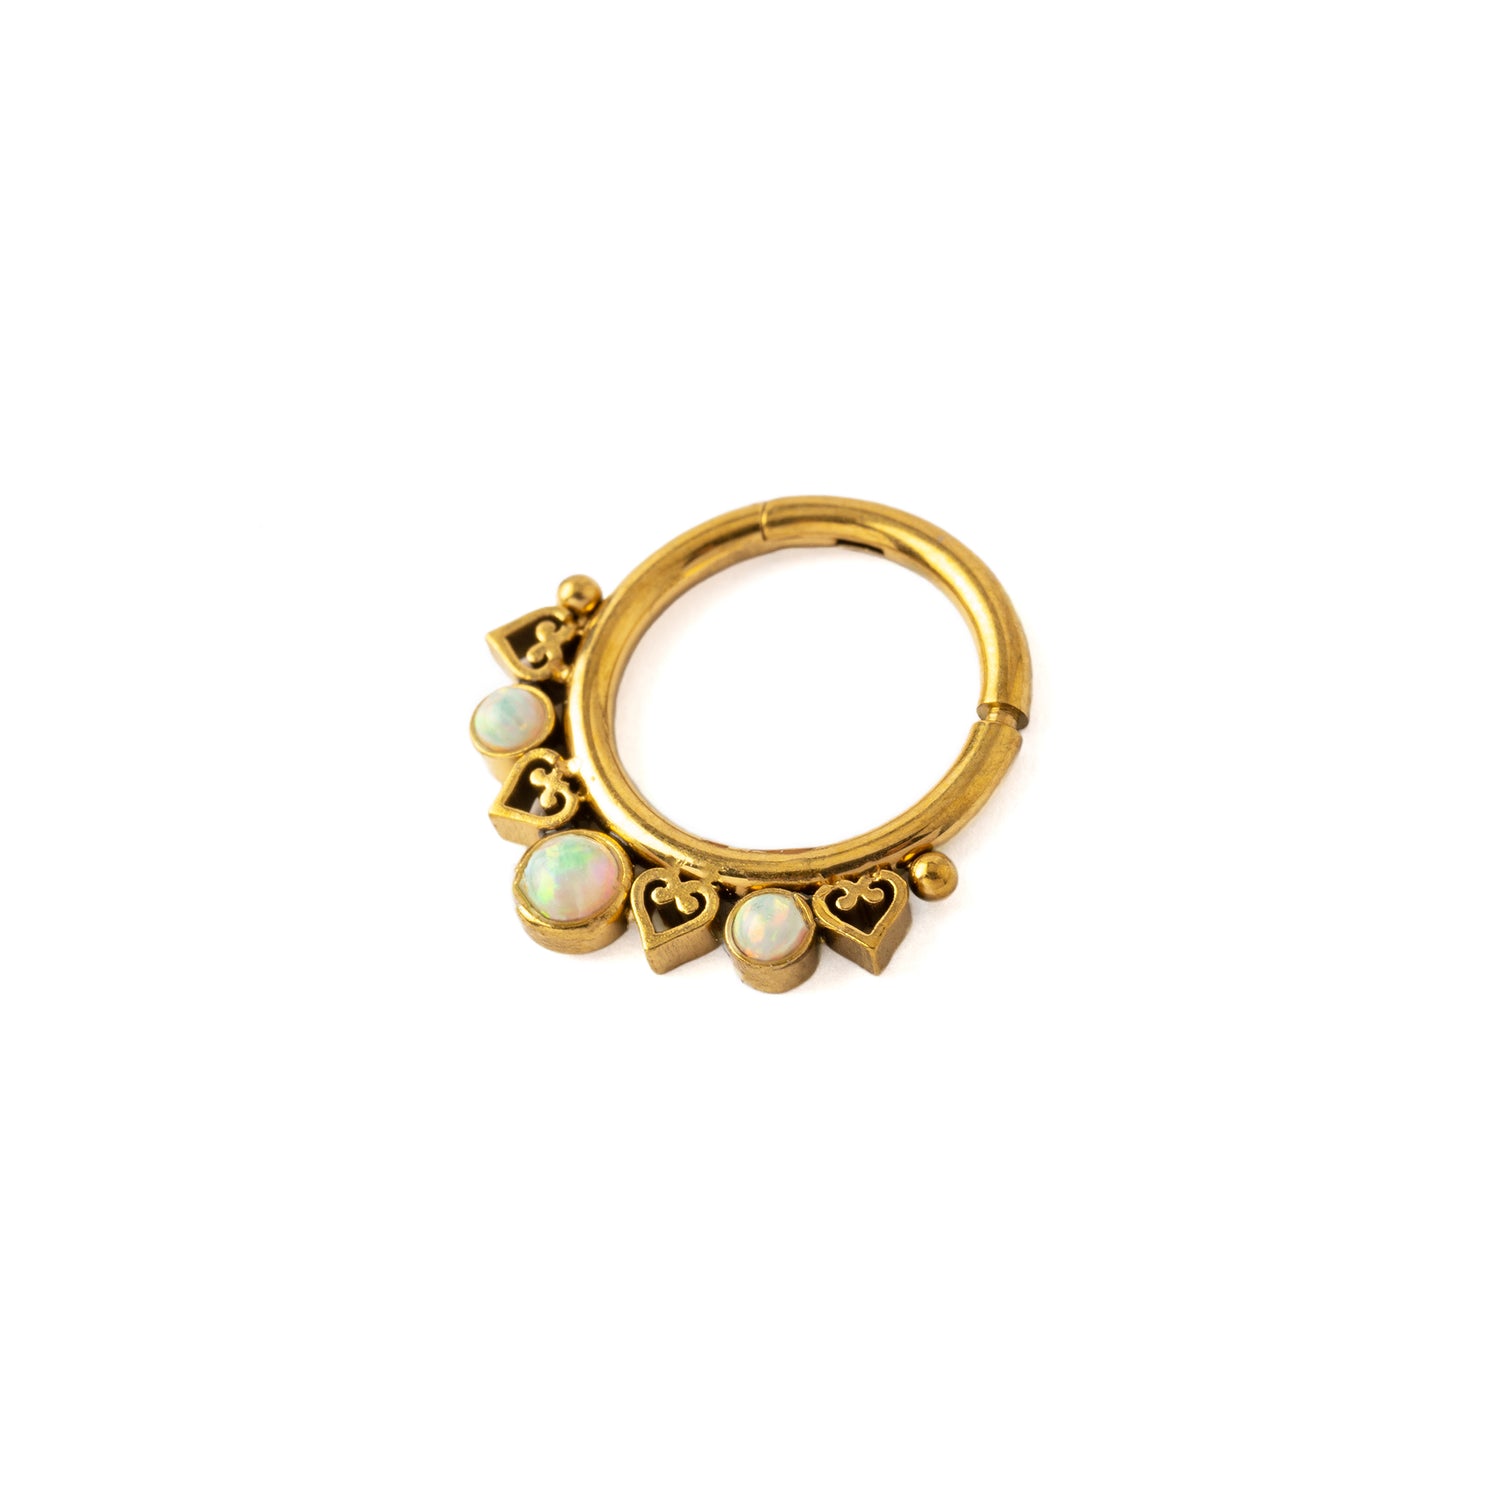 Golden Neptune Septum Clicker with White Opal right side view